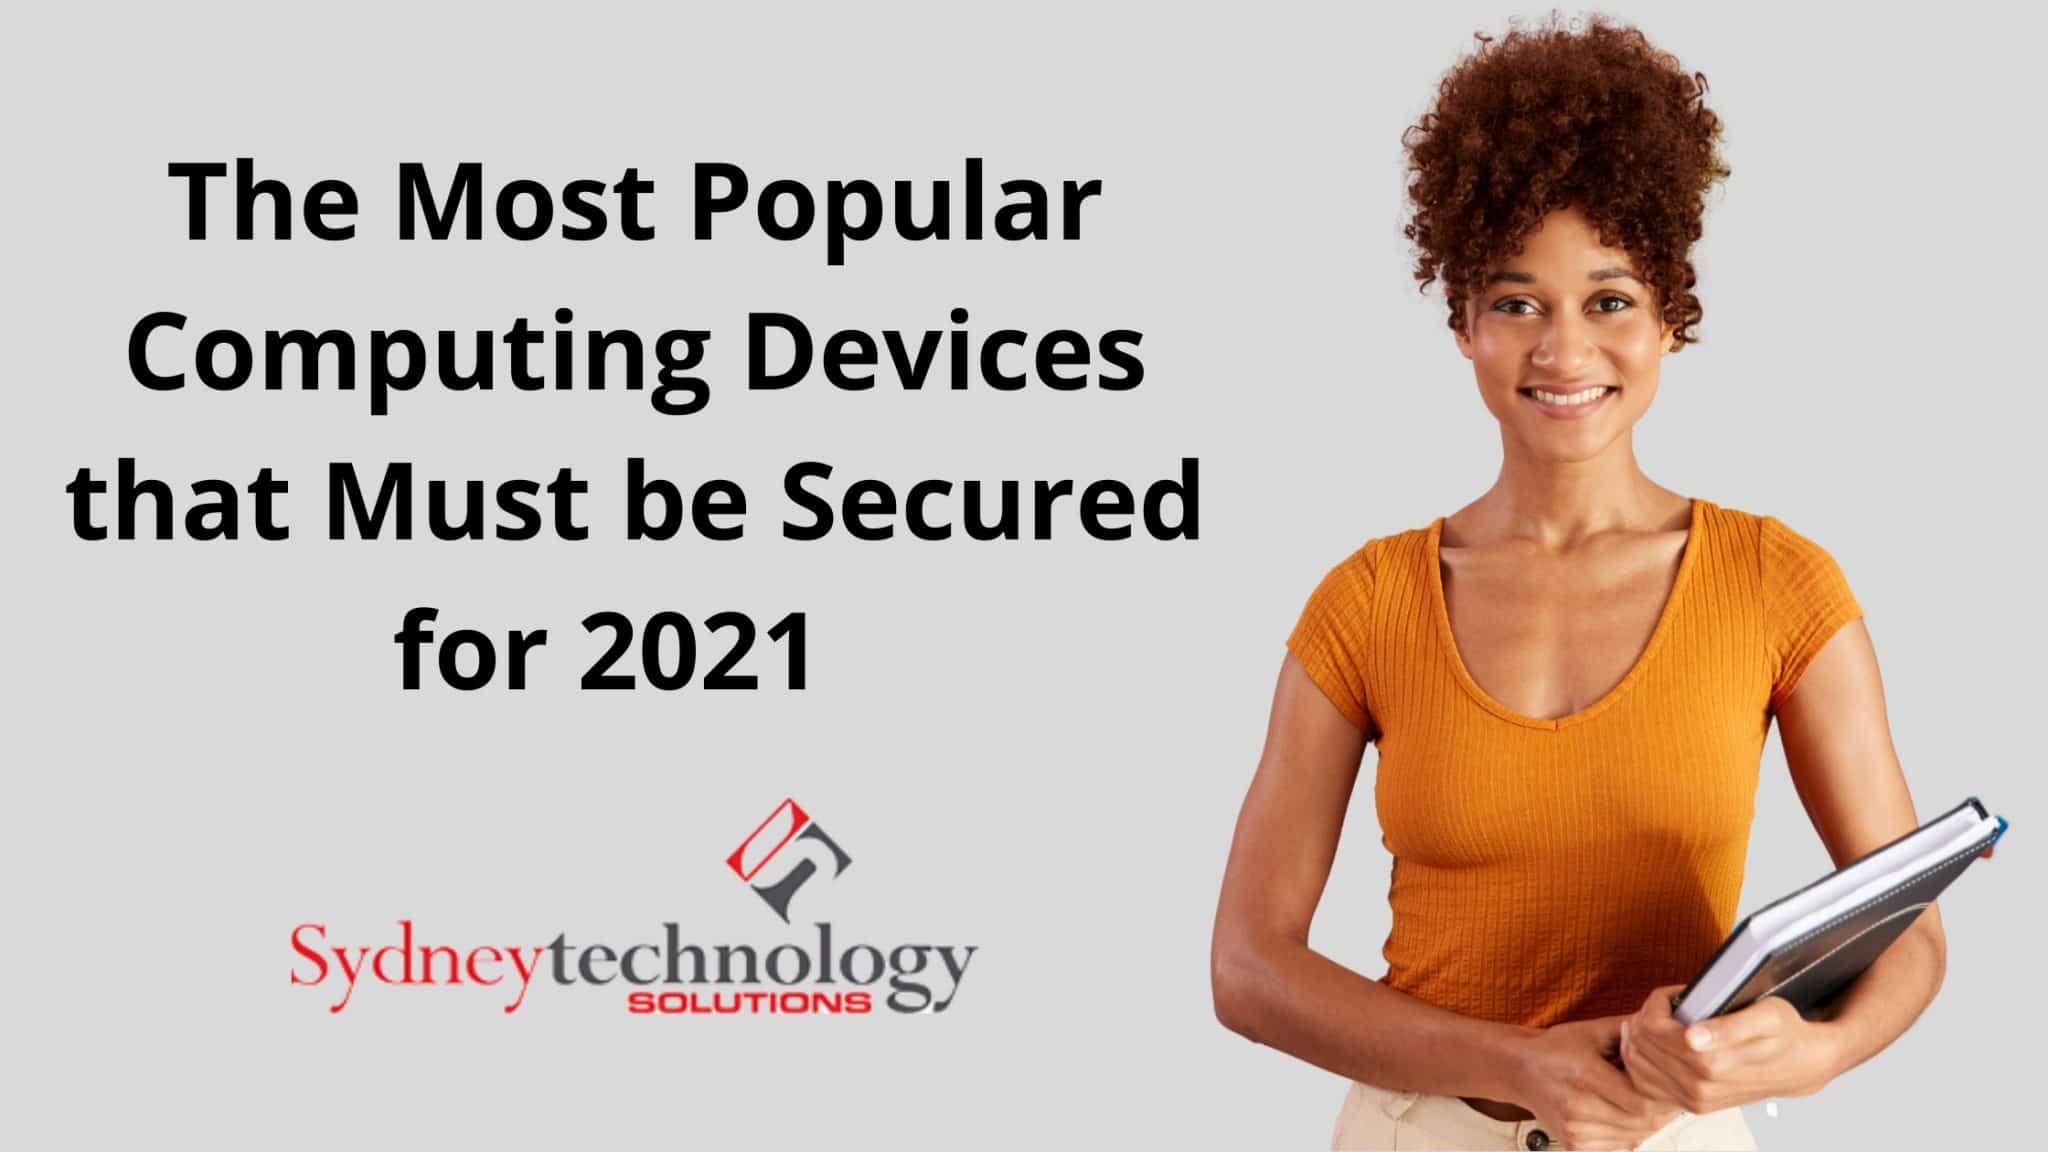 The Most Popular Computing Devices that Must be Secured for 2021